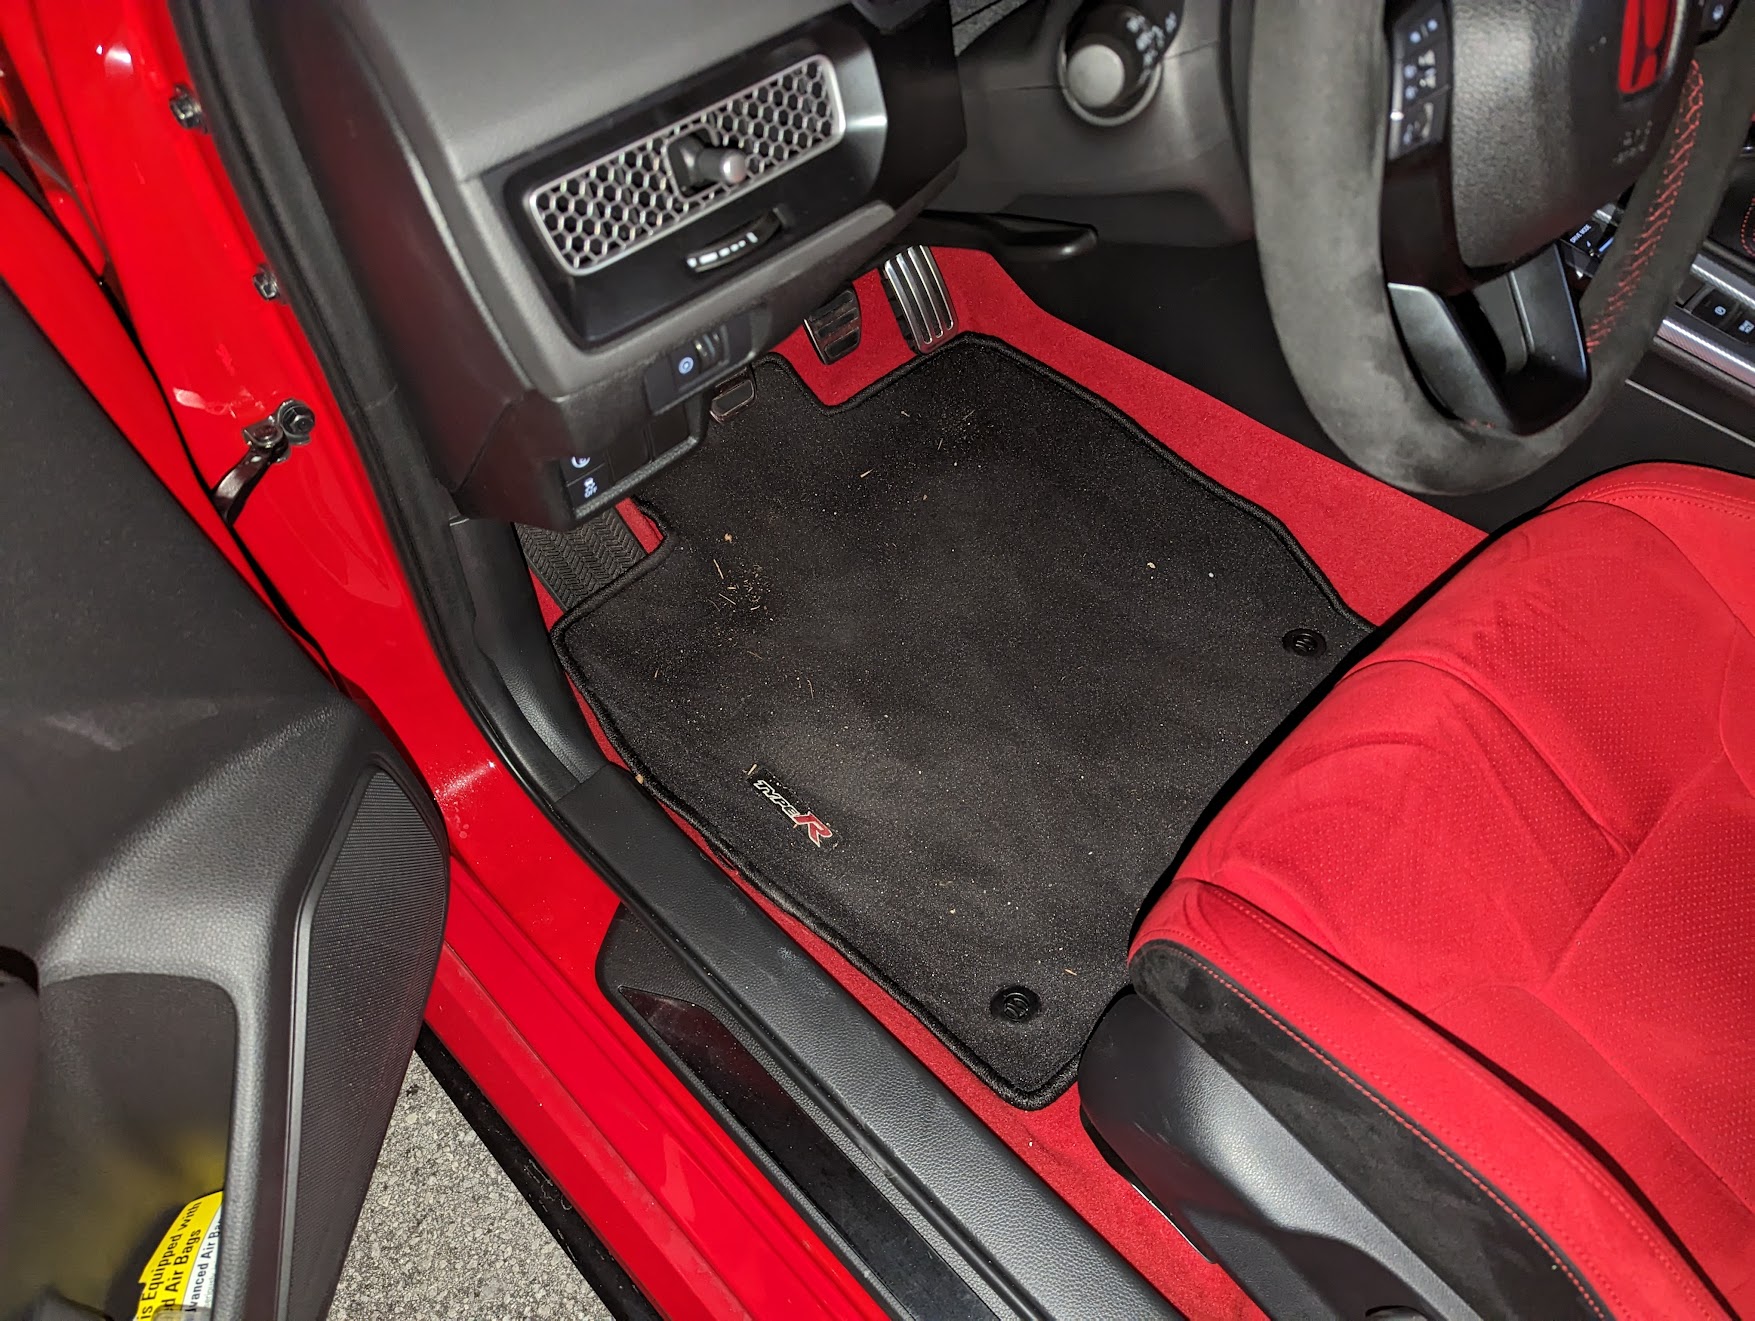 11th Gen Honda Civic What Pre-Installed Options Do You Like? PXL_20230114_015236284